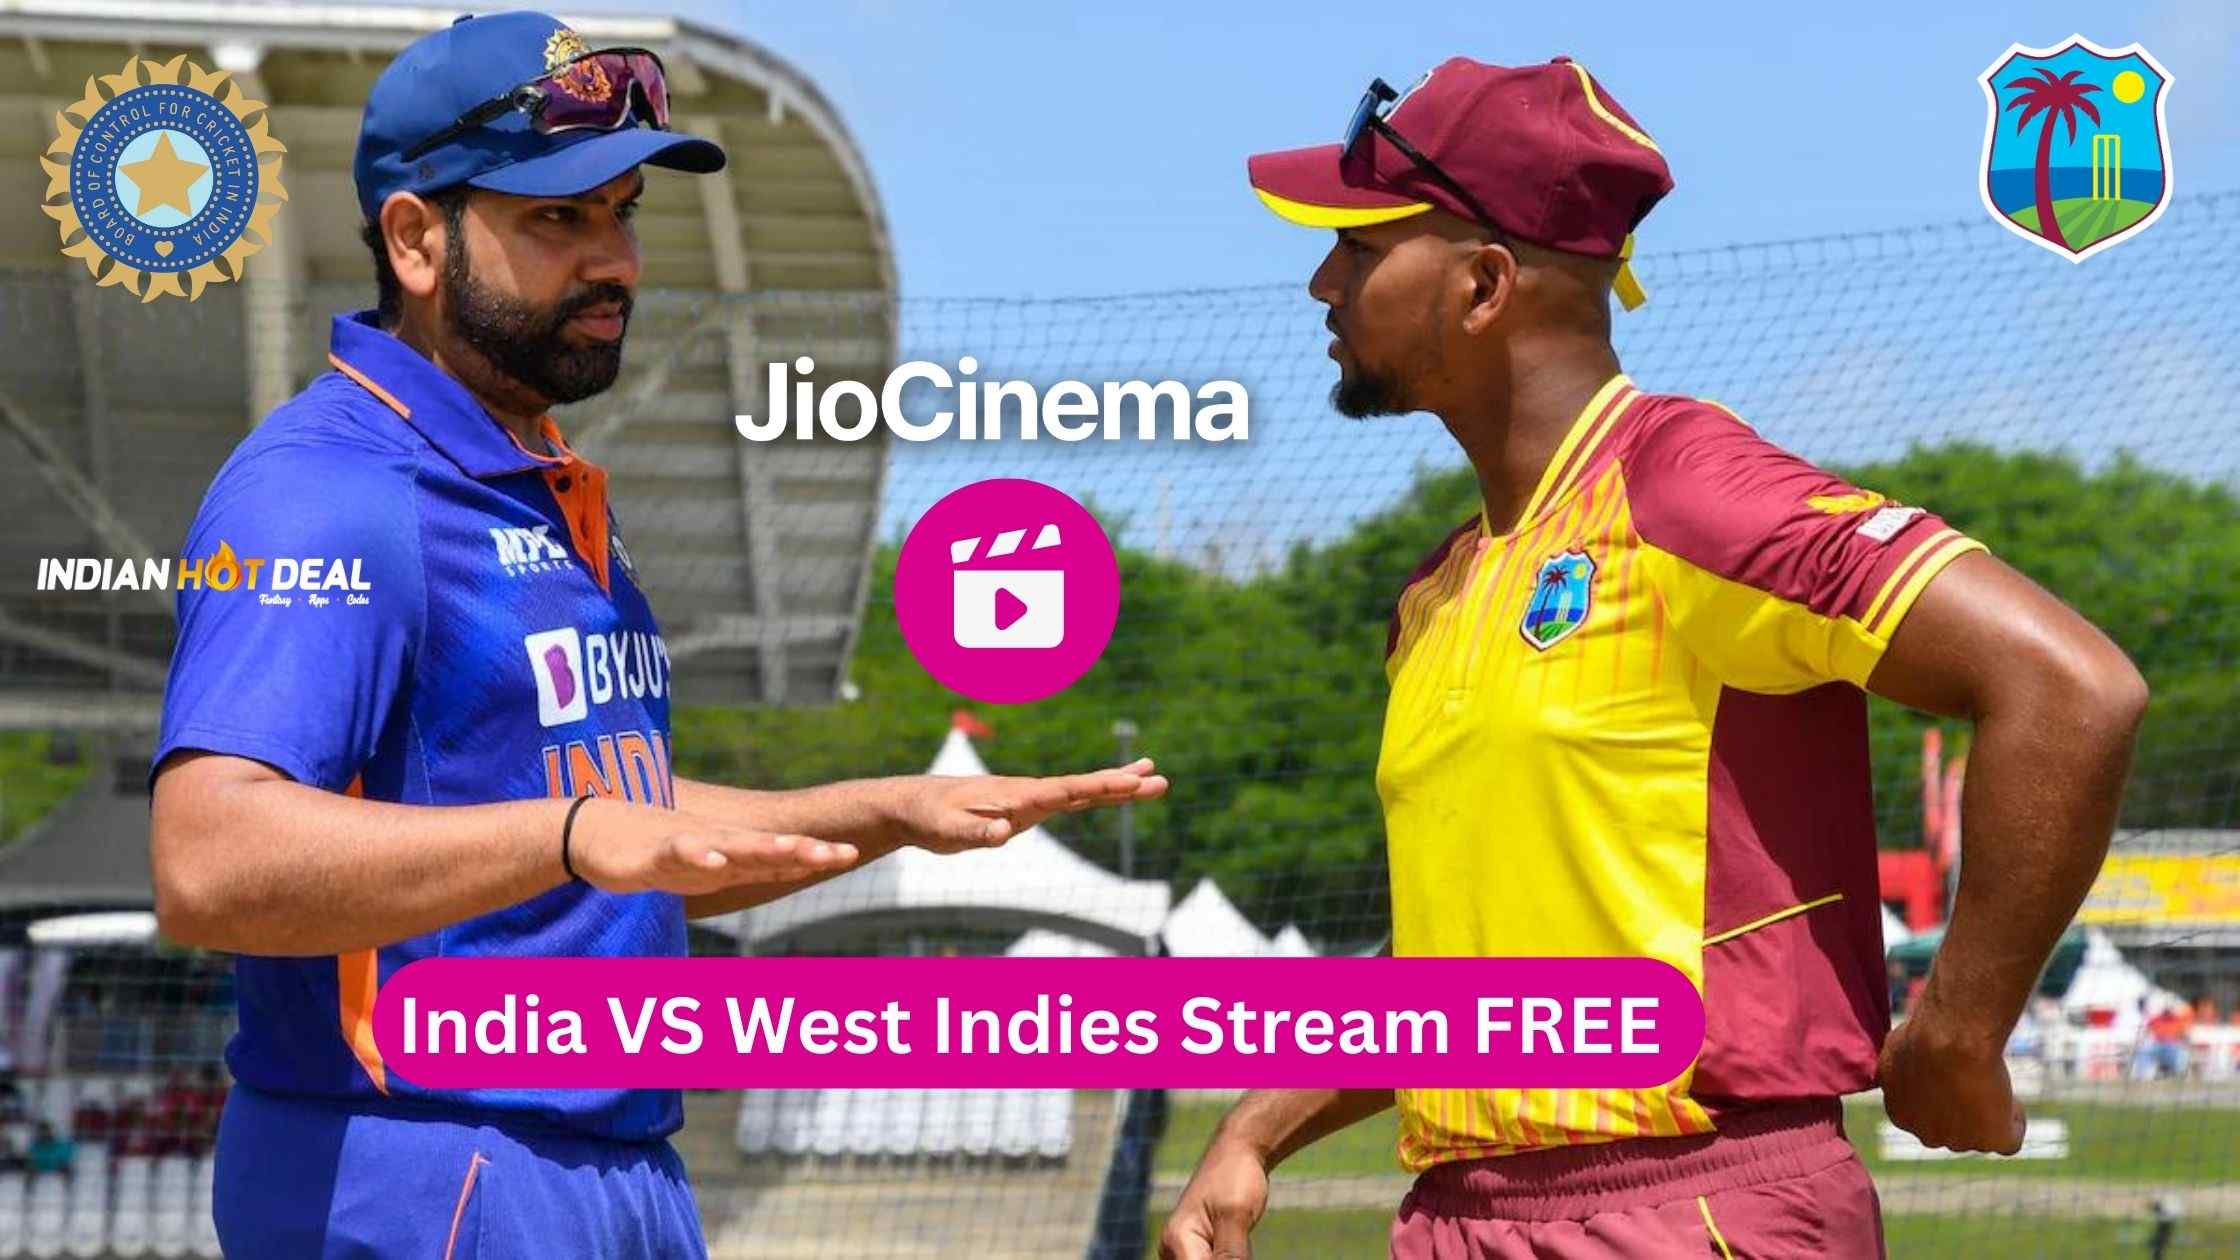 JioCinema Announces FREE Streaming of India vs. West Indies For All Sim Cards